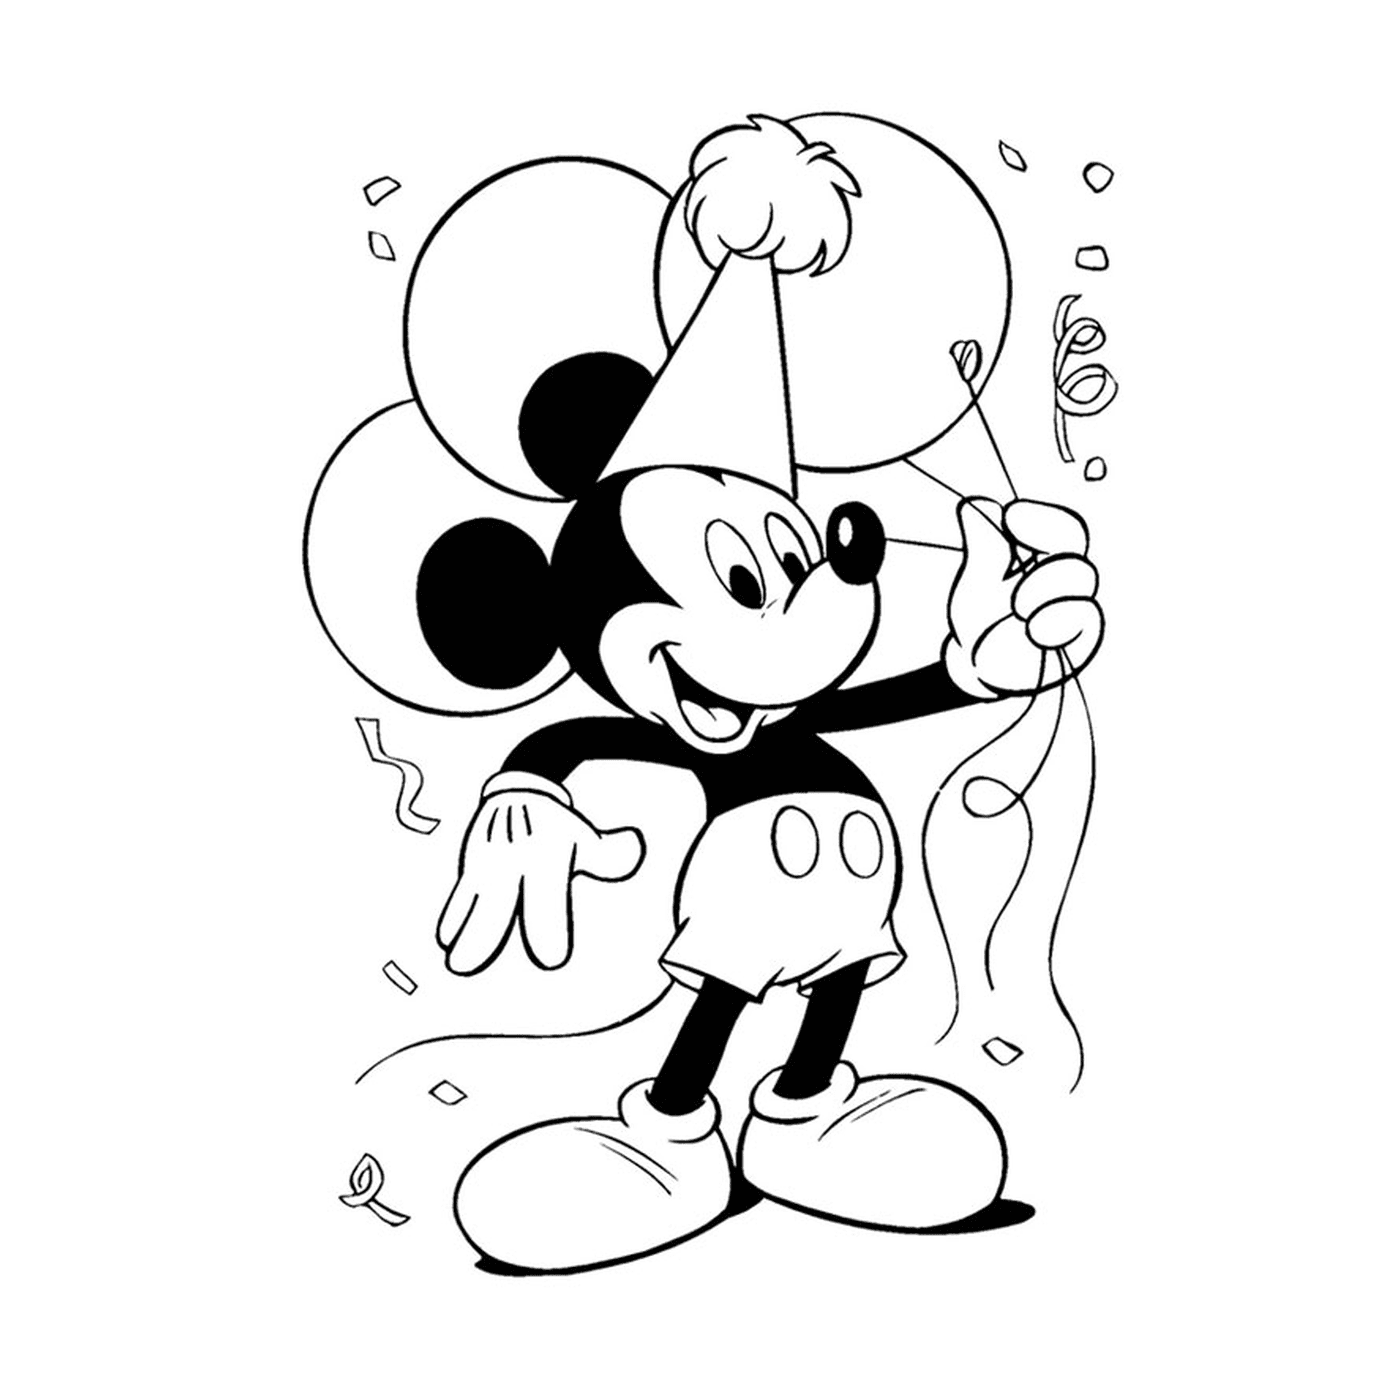  Mickey Mouse holding balloons 